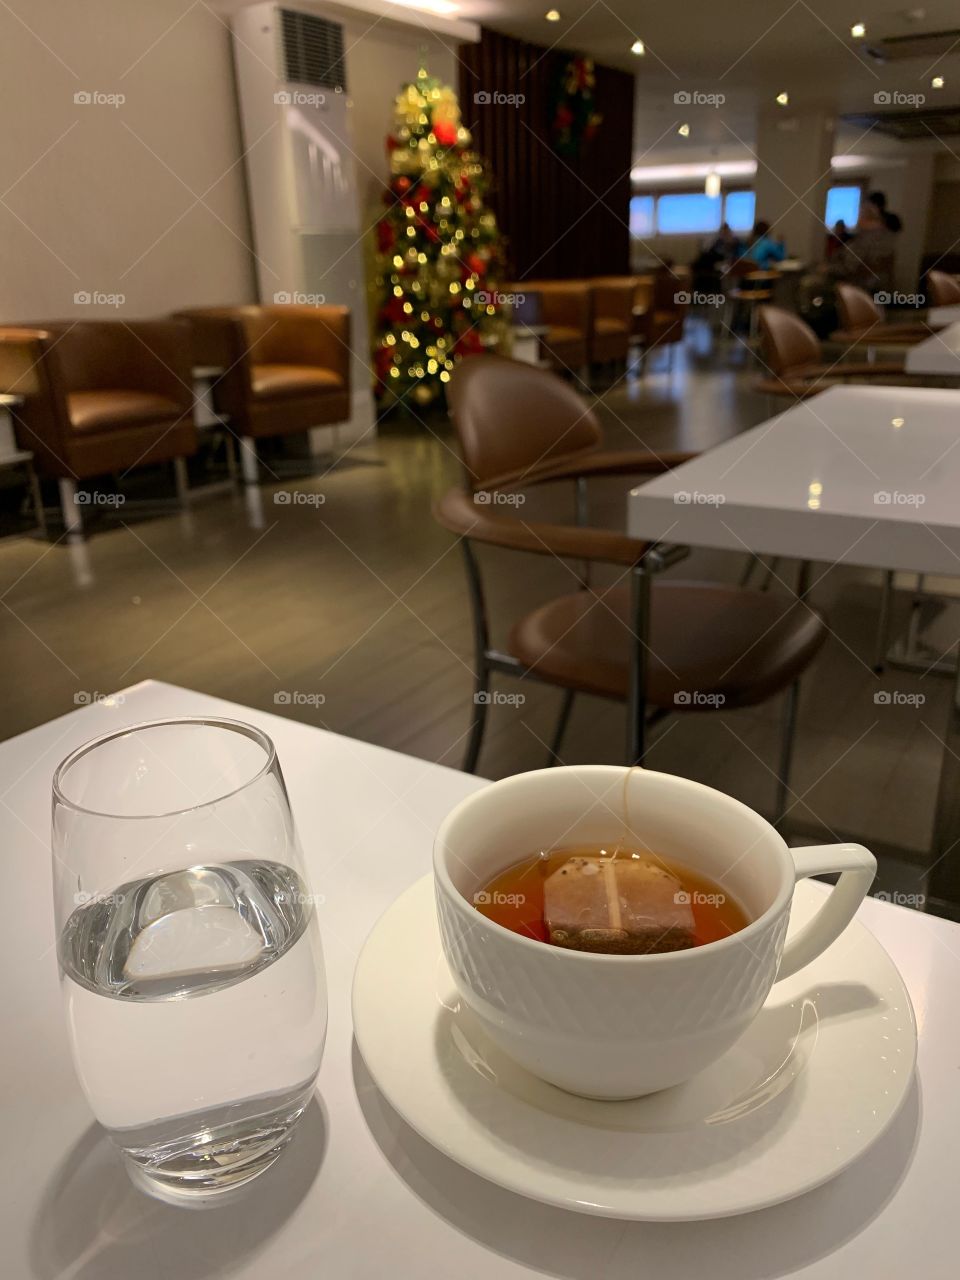 Tea at the airport lounge on Christmas Eve